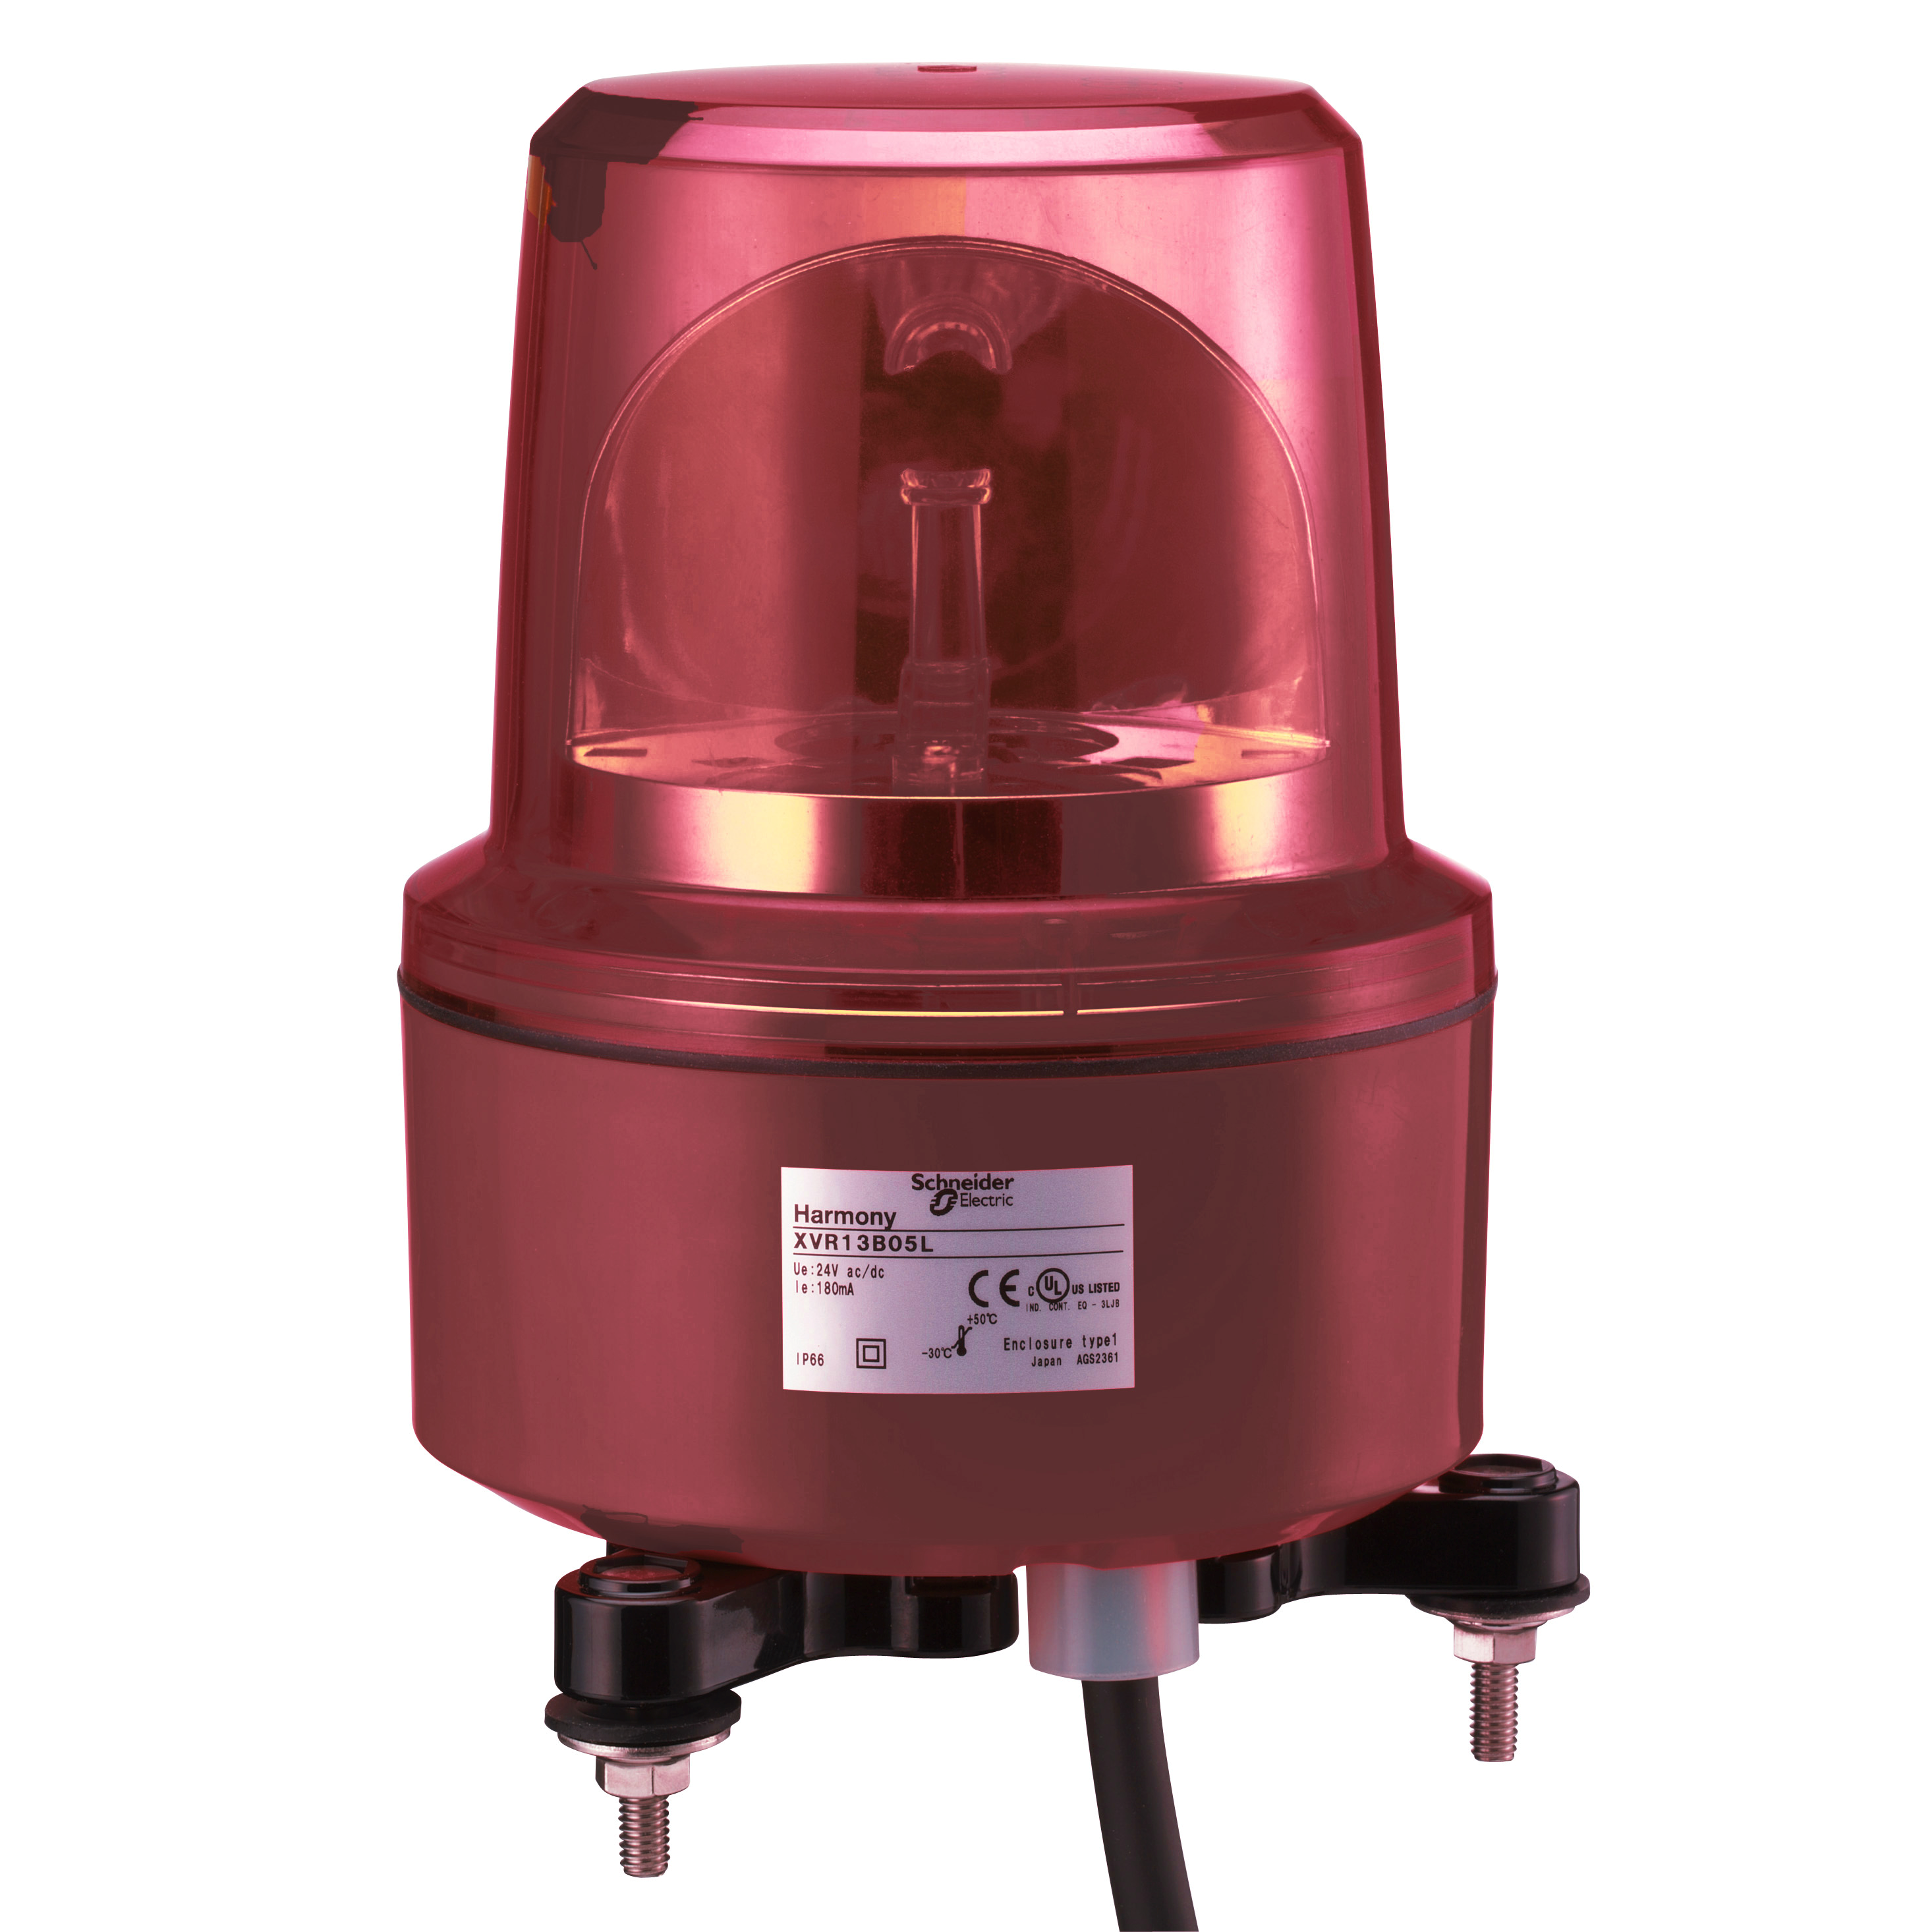 Rotating beacon, Harmony XVR, 130mm, red, without buzzer, 120V AC